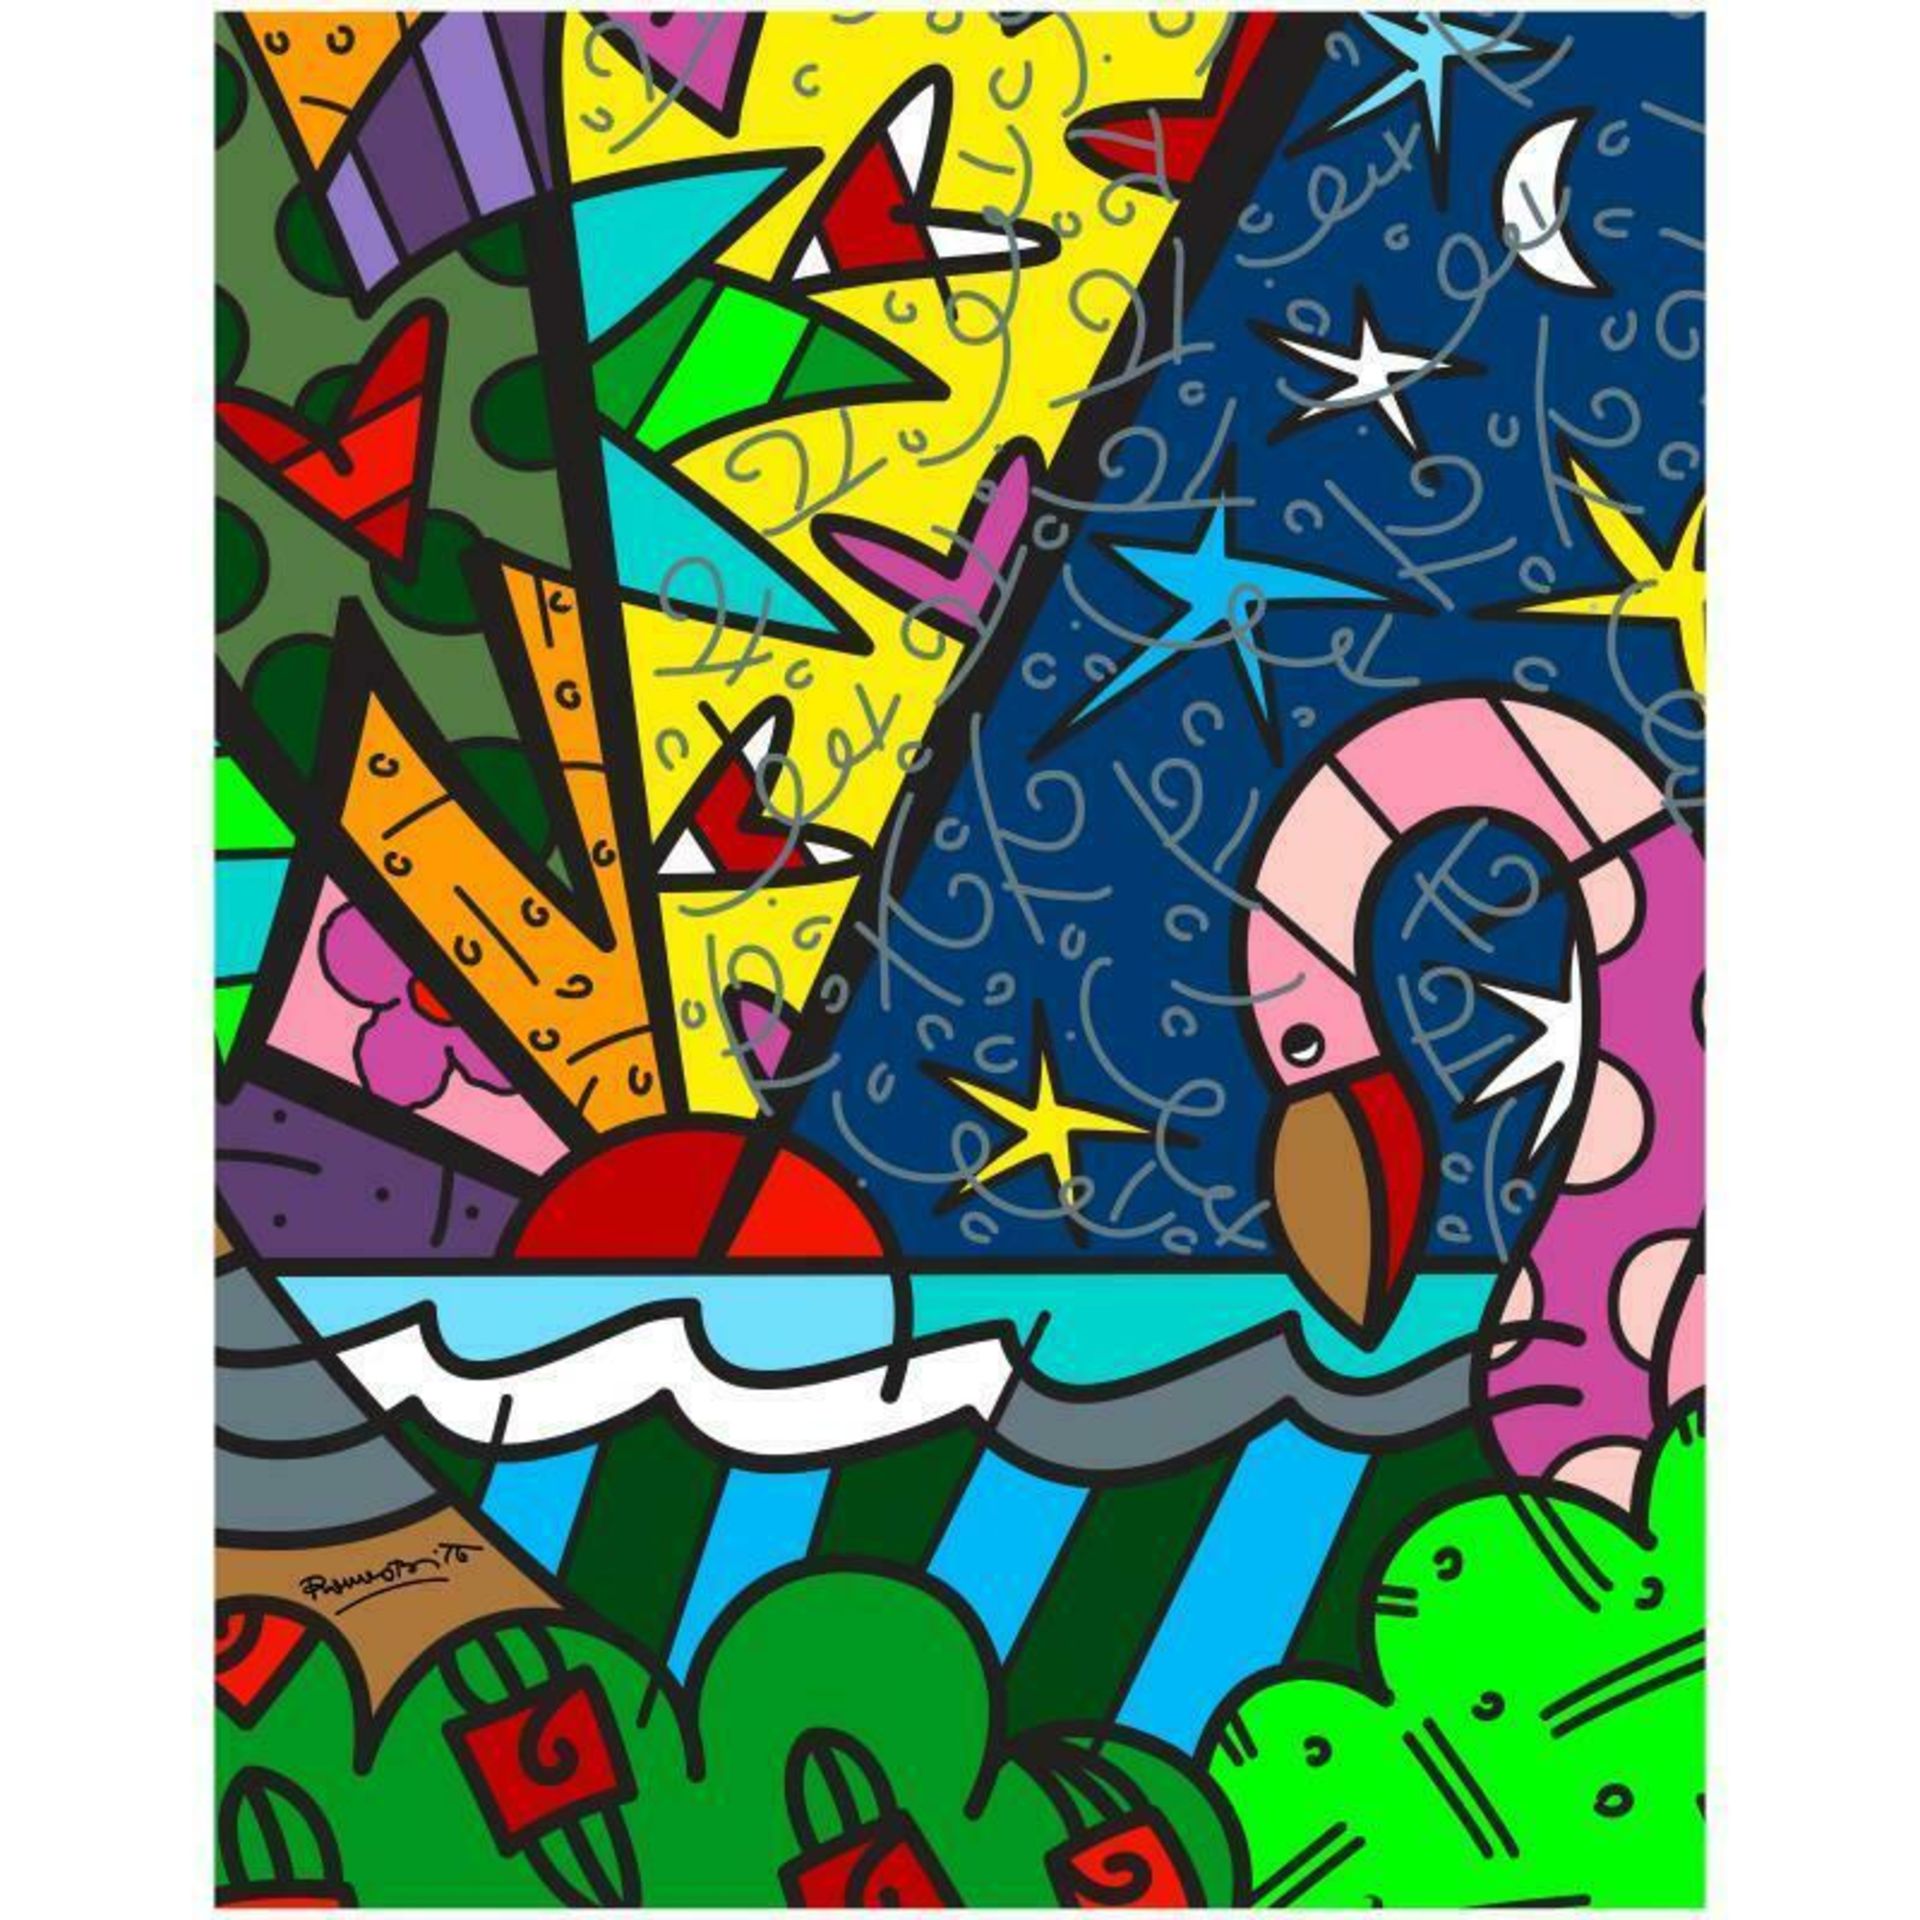 Romero Britto "Real" Hand Signed Limited Edition Giclee on Canvas; Authenticated